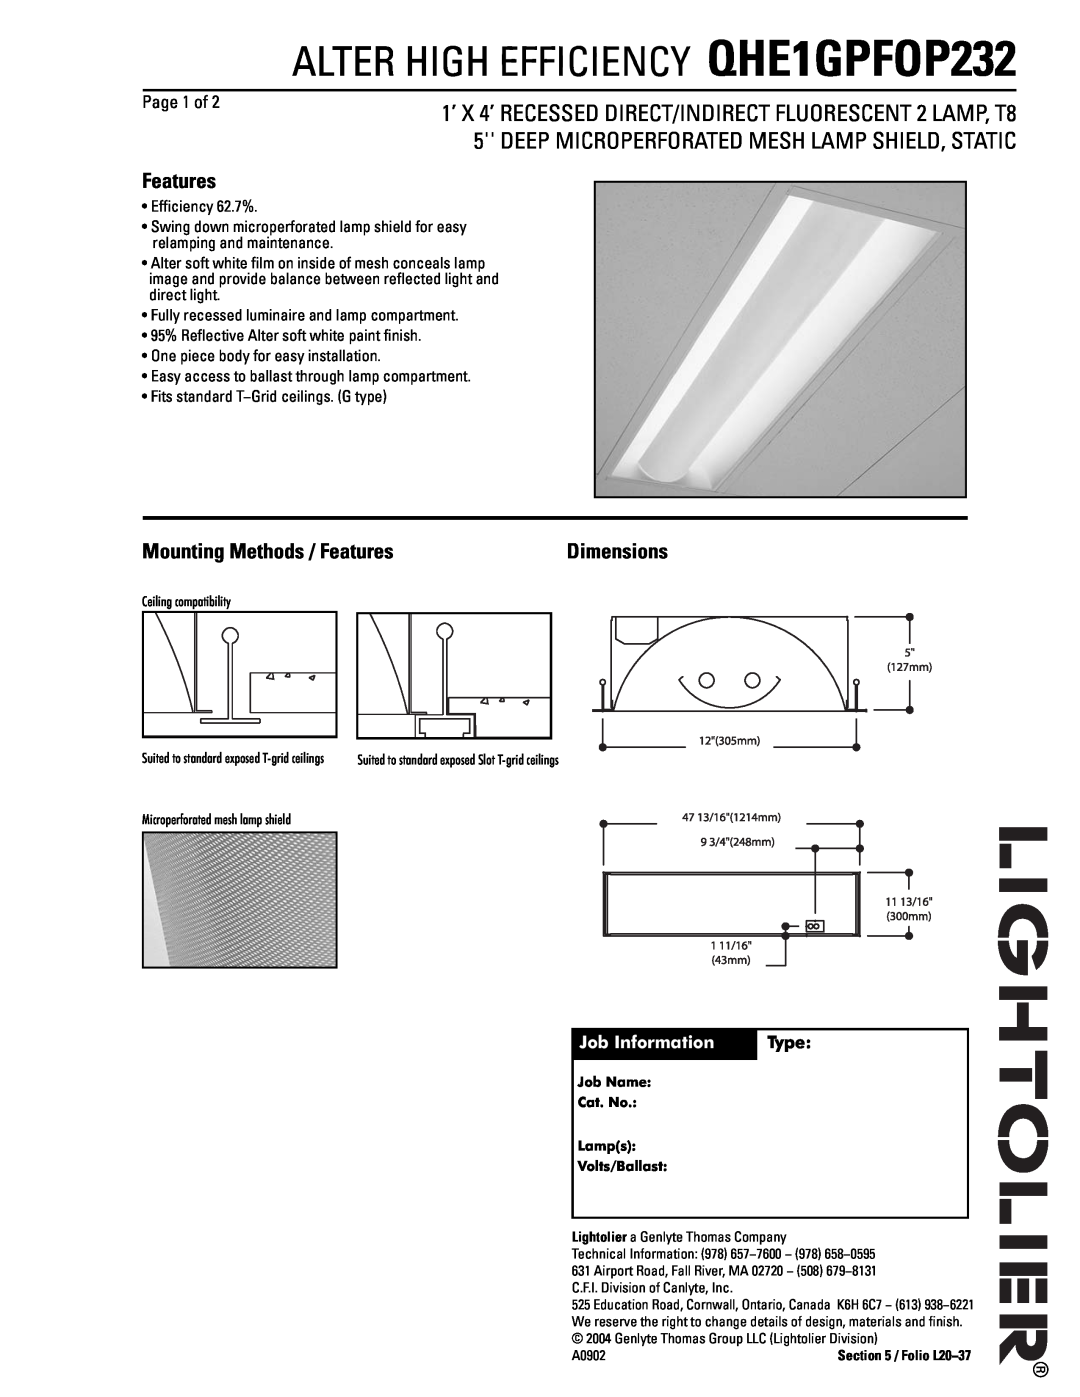 Lightolier dimensions ALTER HIGH EFFICIENCY QHE1GPFOP232, Mounting Methods / Features, Page 1 of, Job Information 